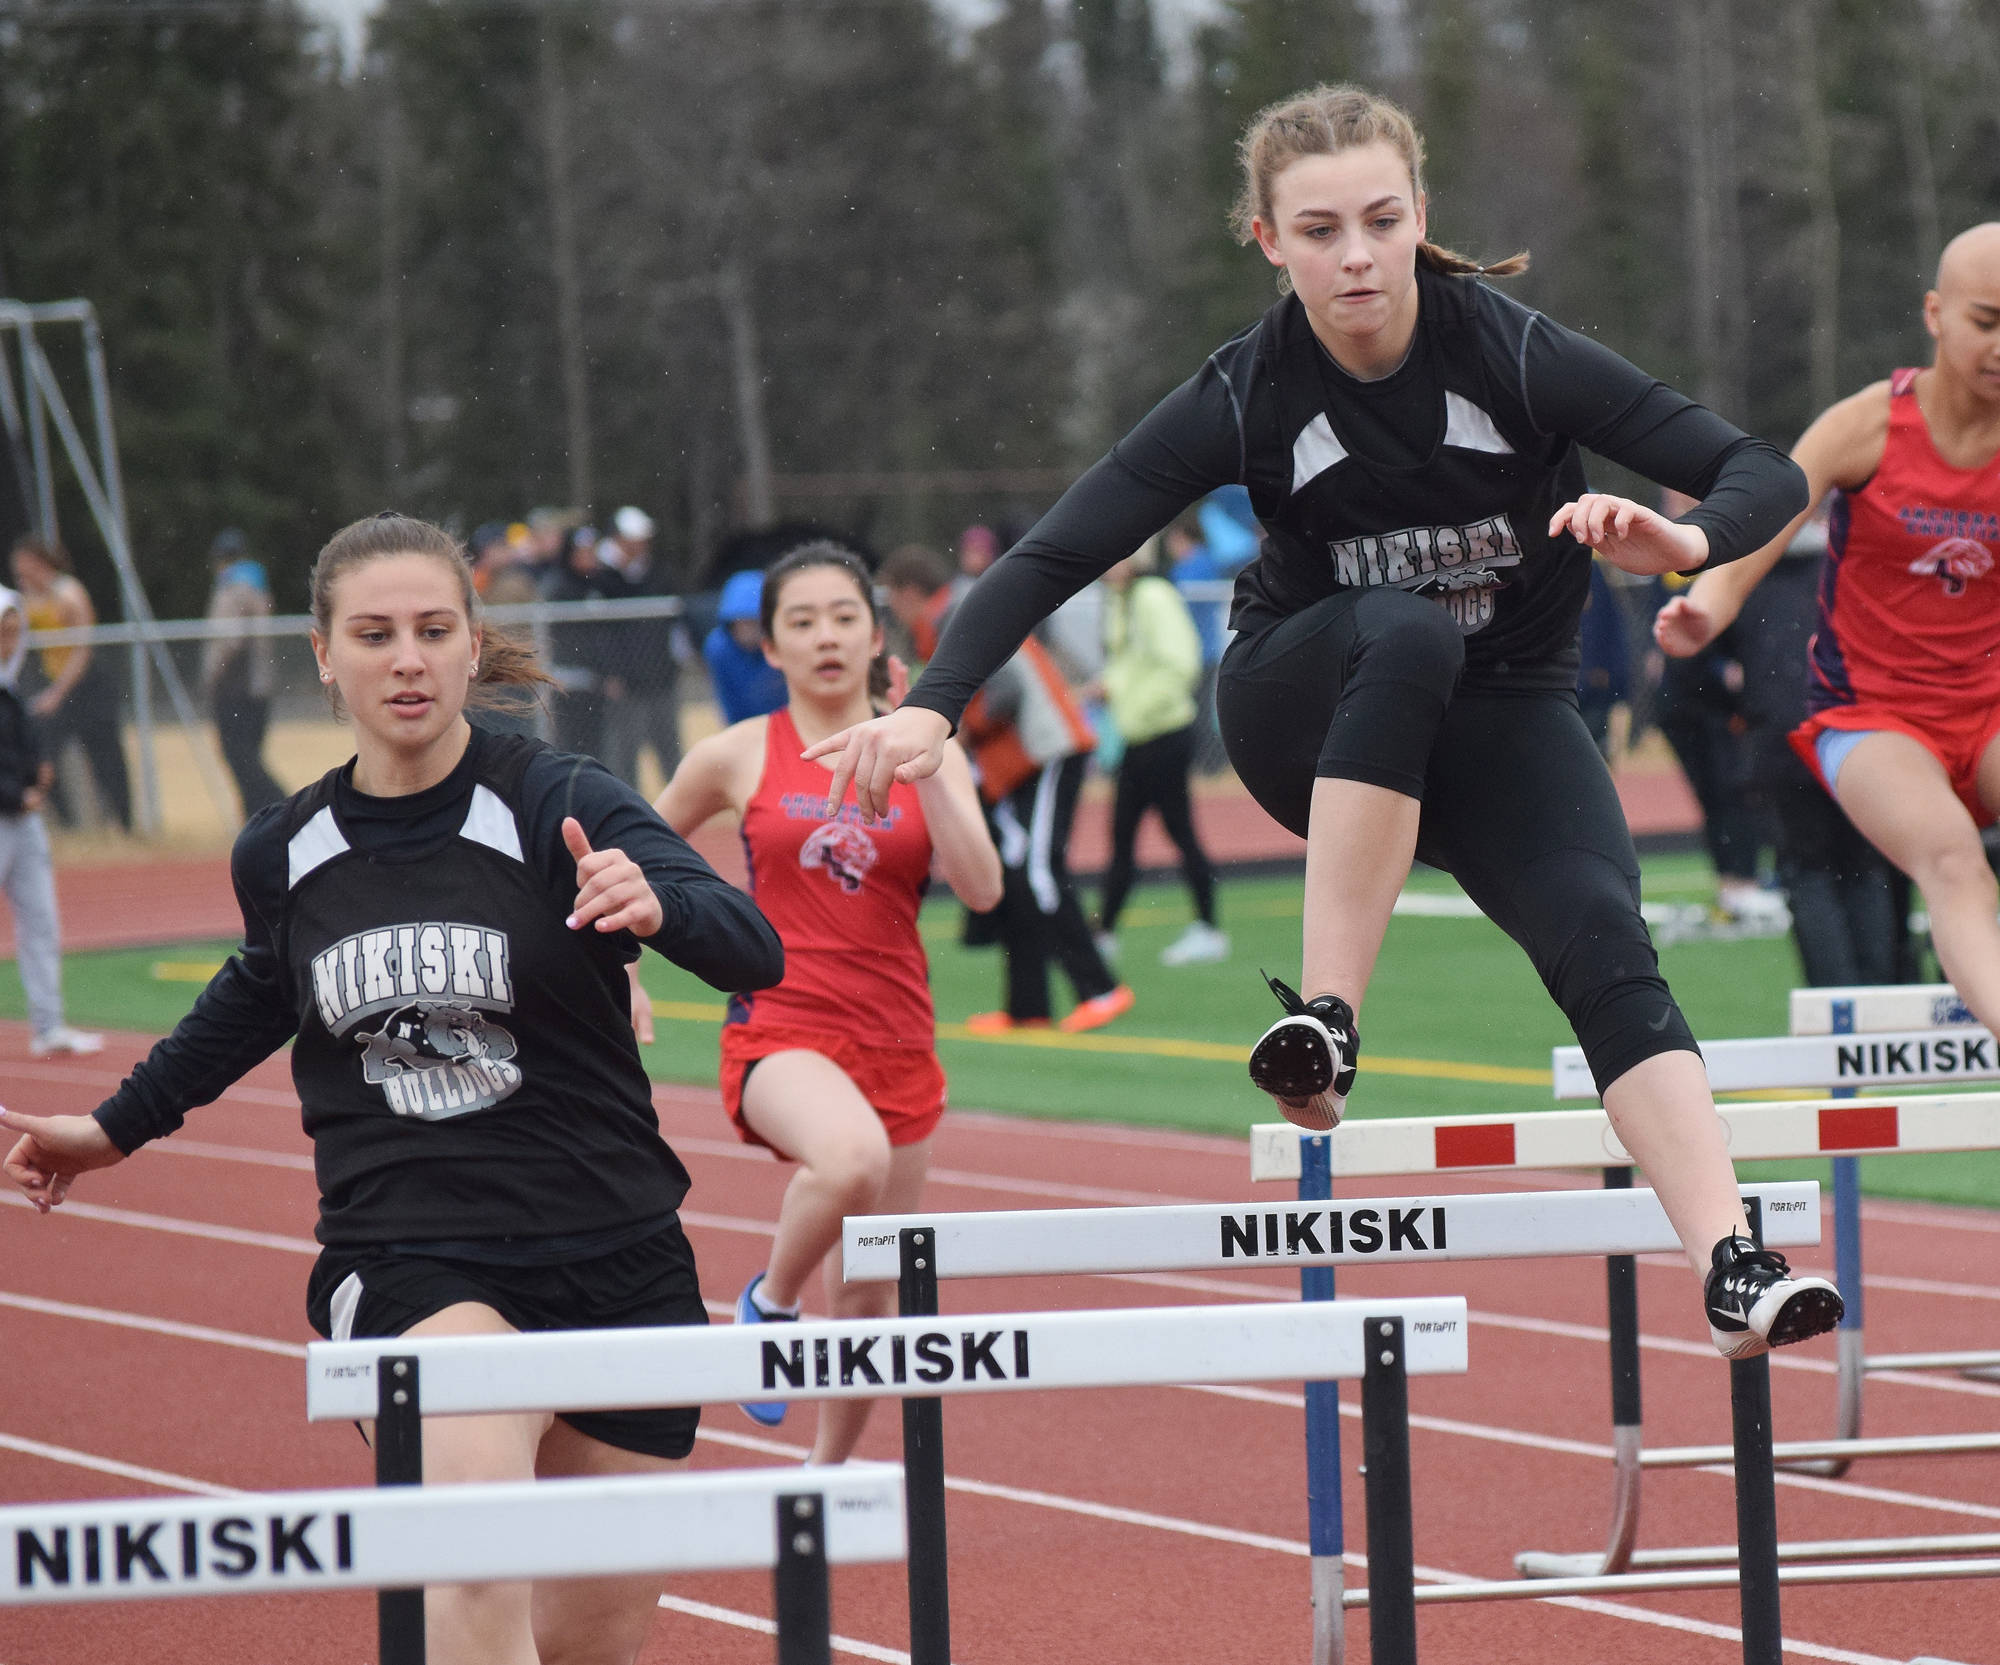 Nikiski teammates Kelsey Clark (left) and Bethany Carstens hurdle a barrier in the girls 300-meter hurdles Saturday at the Kenai Invitational at Ed Hollier Field. (Photo by Joey Klecka/Peninsula Clarion)